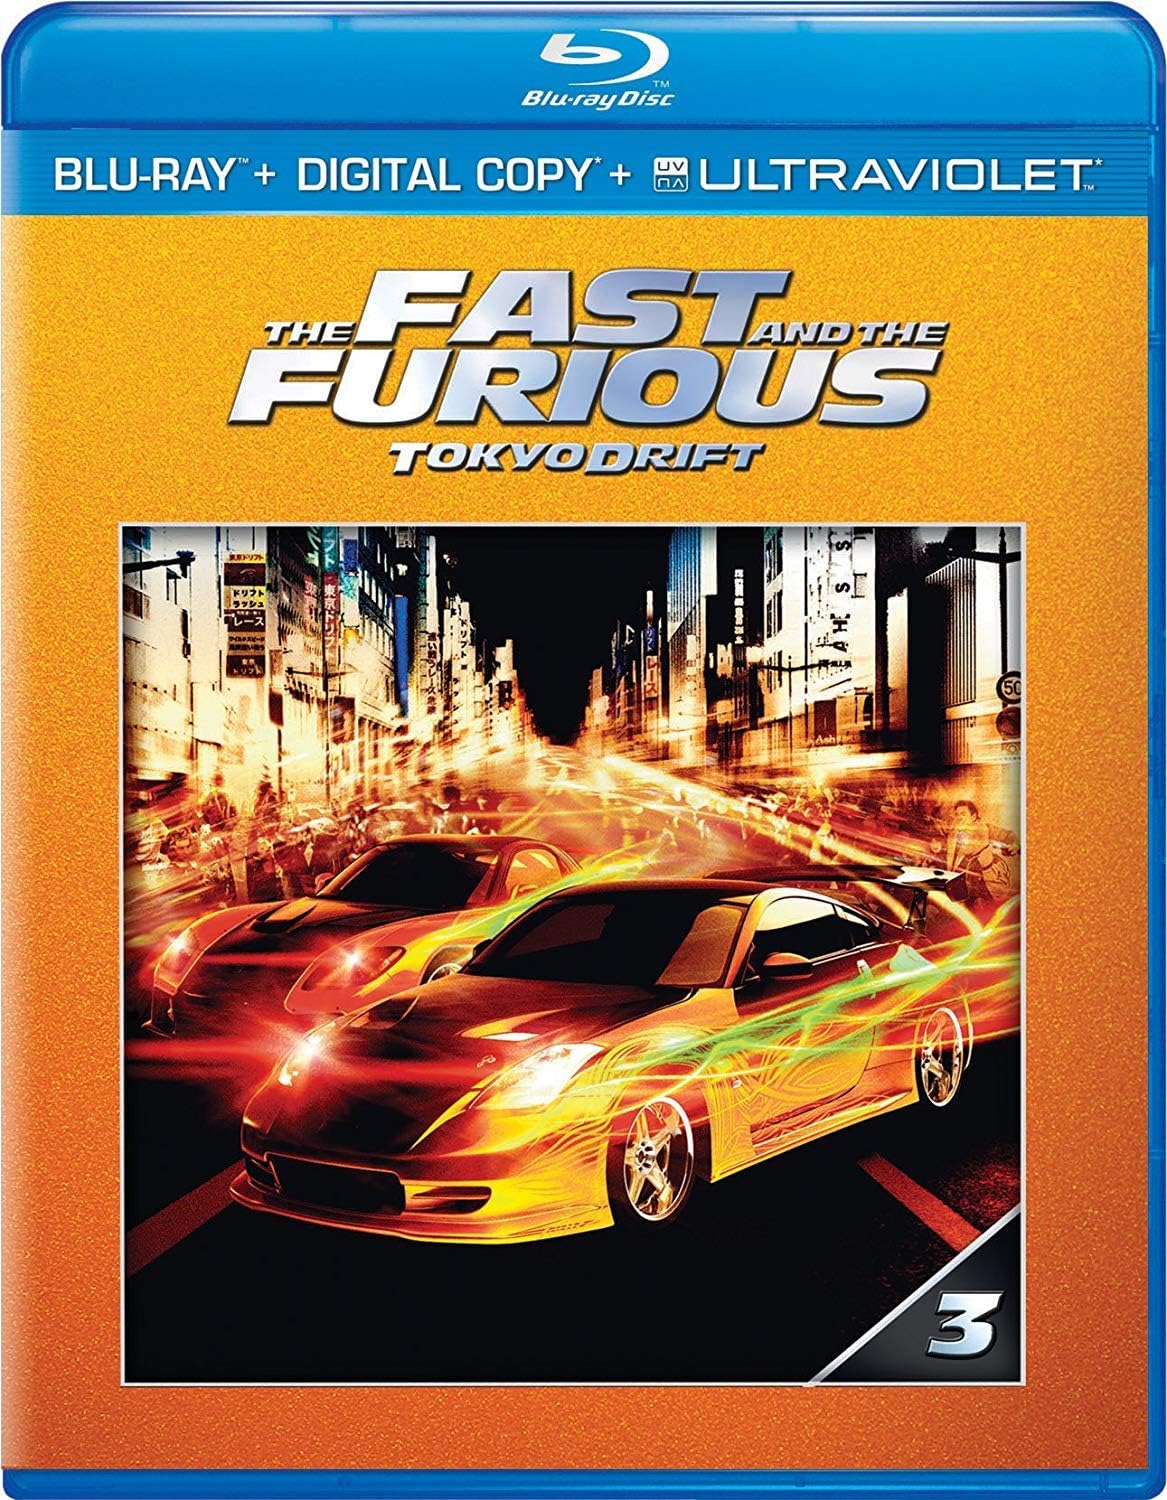 The Fast and the Furious: Tokyo Drift (2006) 640Kbps 23.976Fps 48Khz 5.1Ch BluRay Turkish Audio TAC